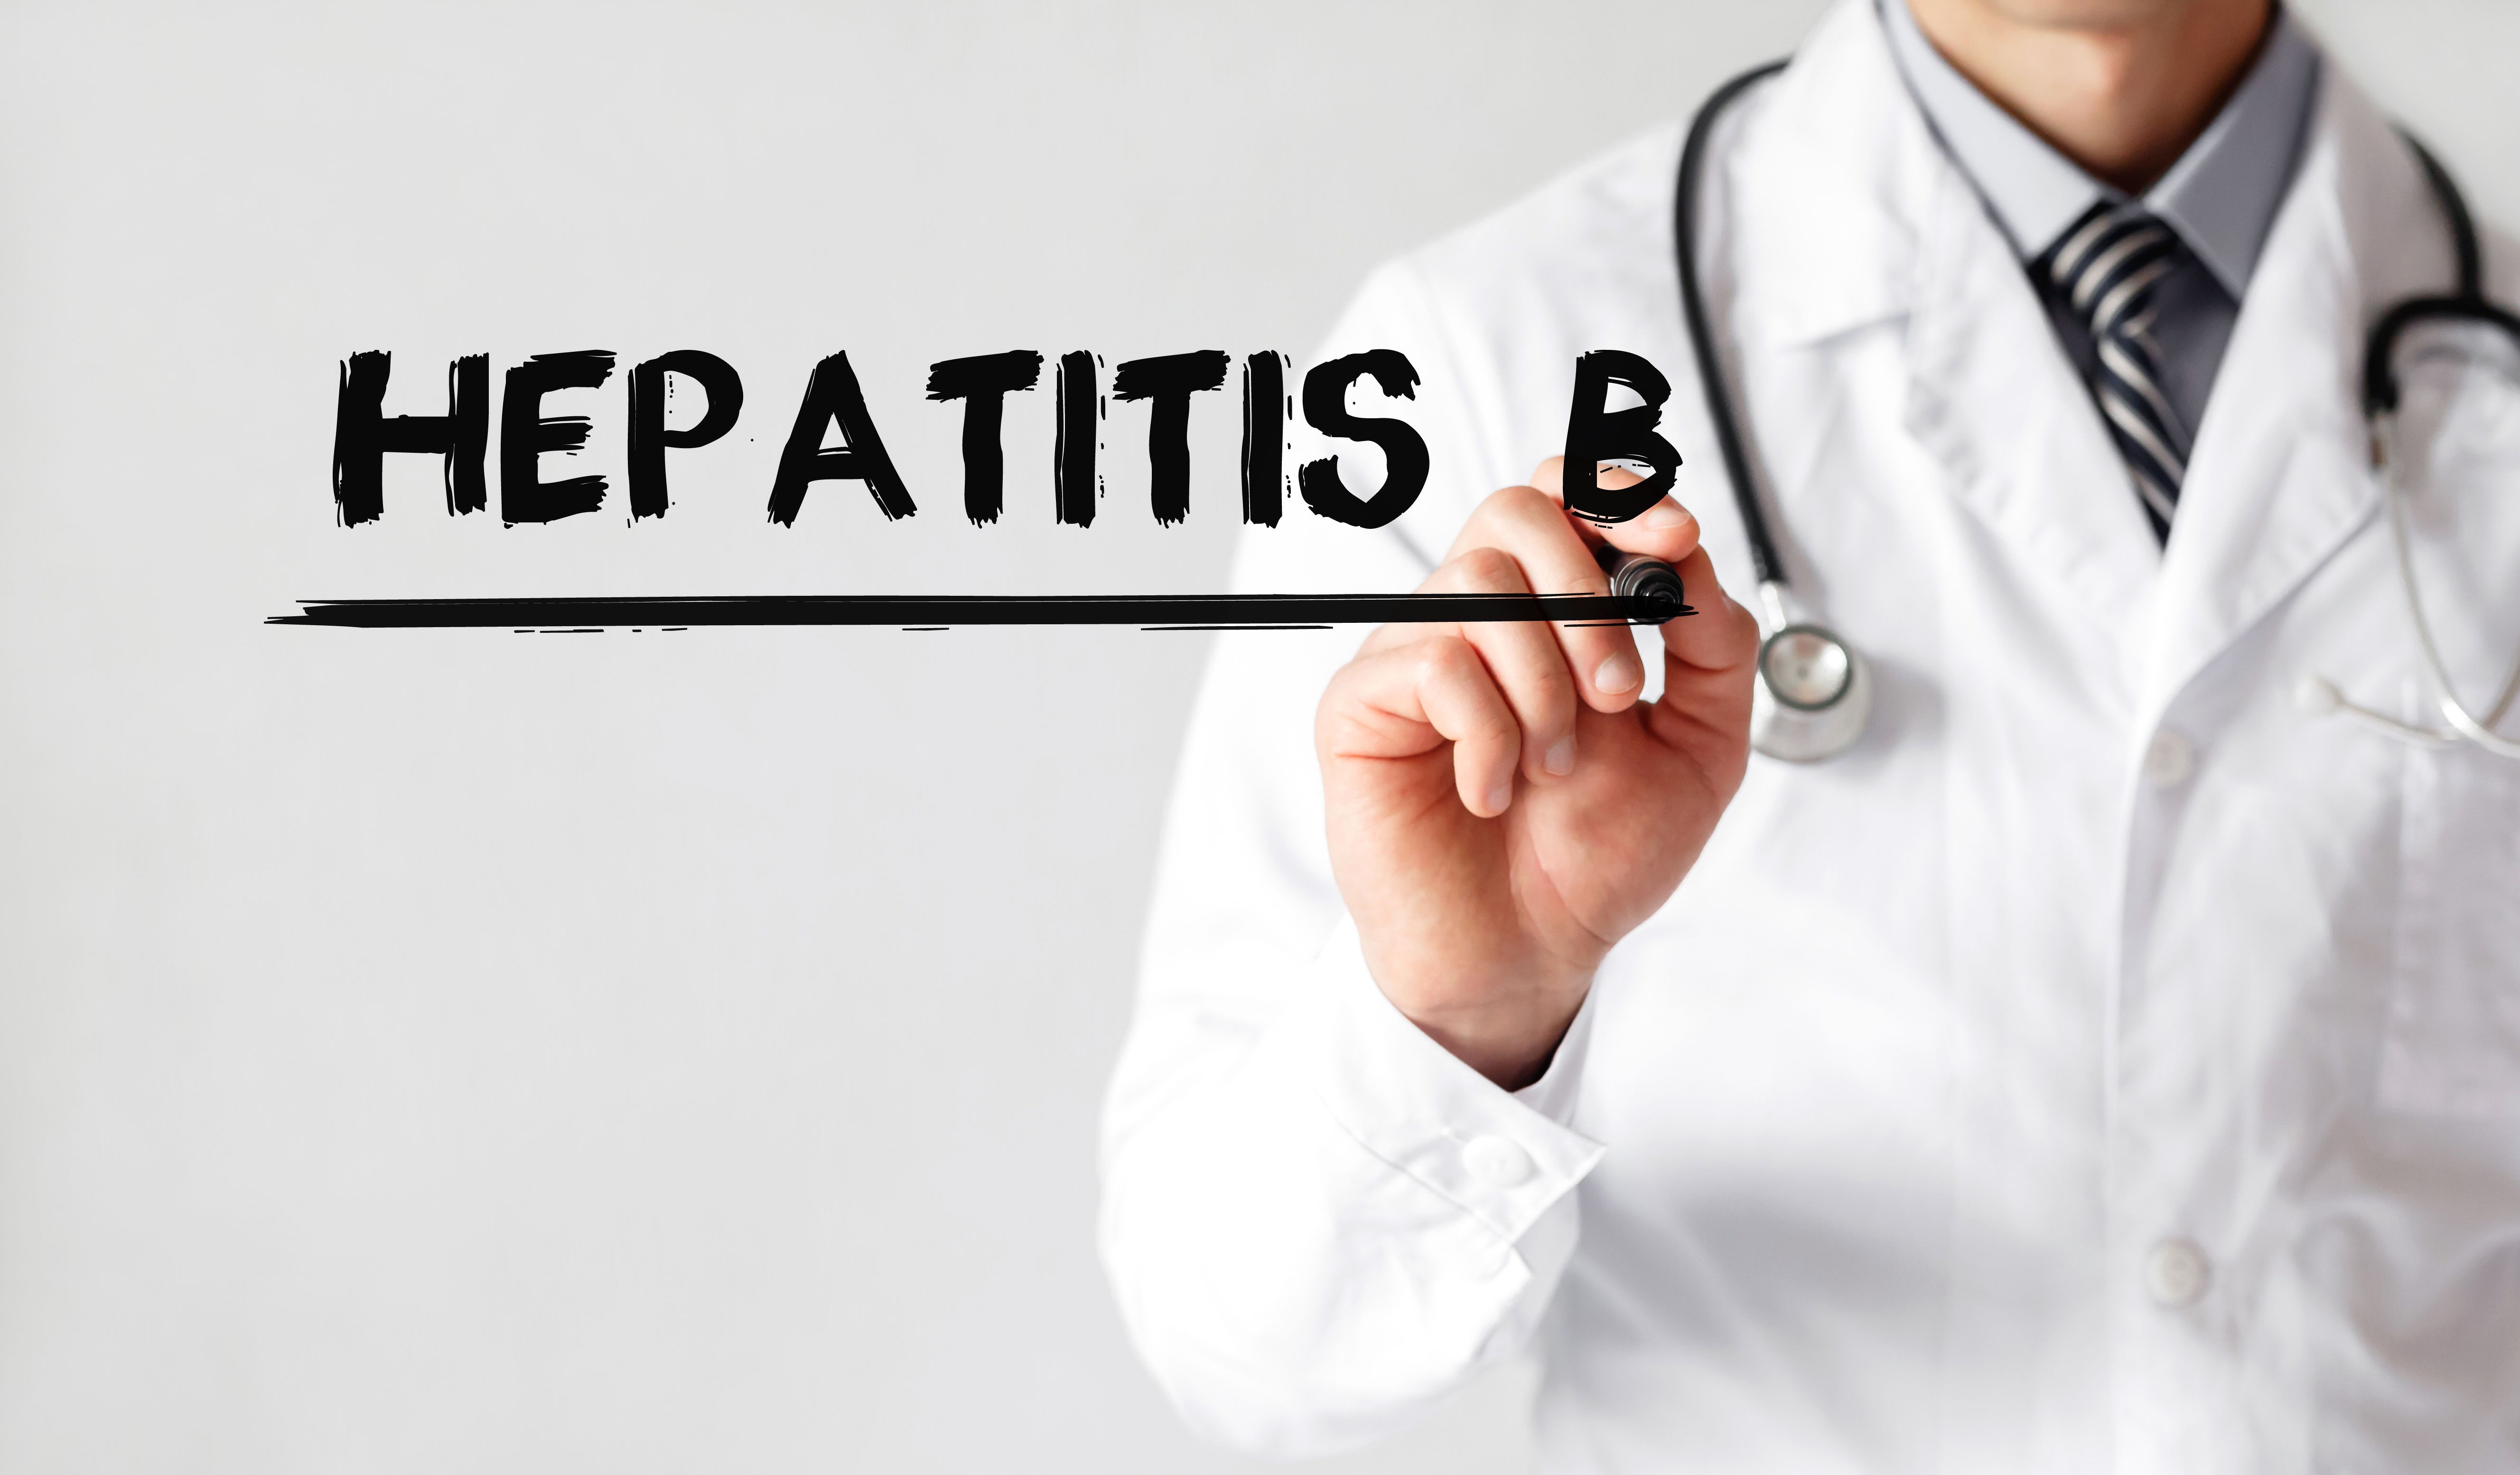 Experts are advocating for occult hepatitis B to be spotlighted.